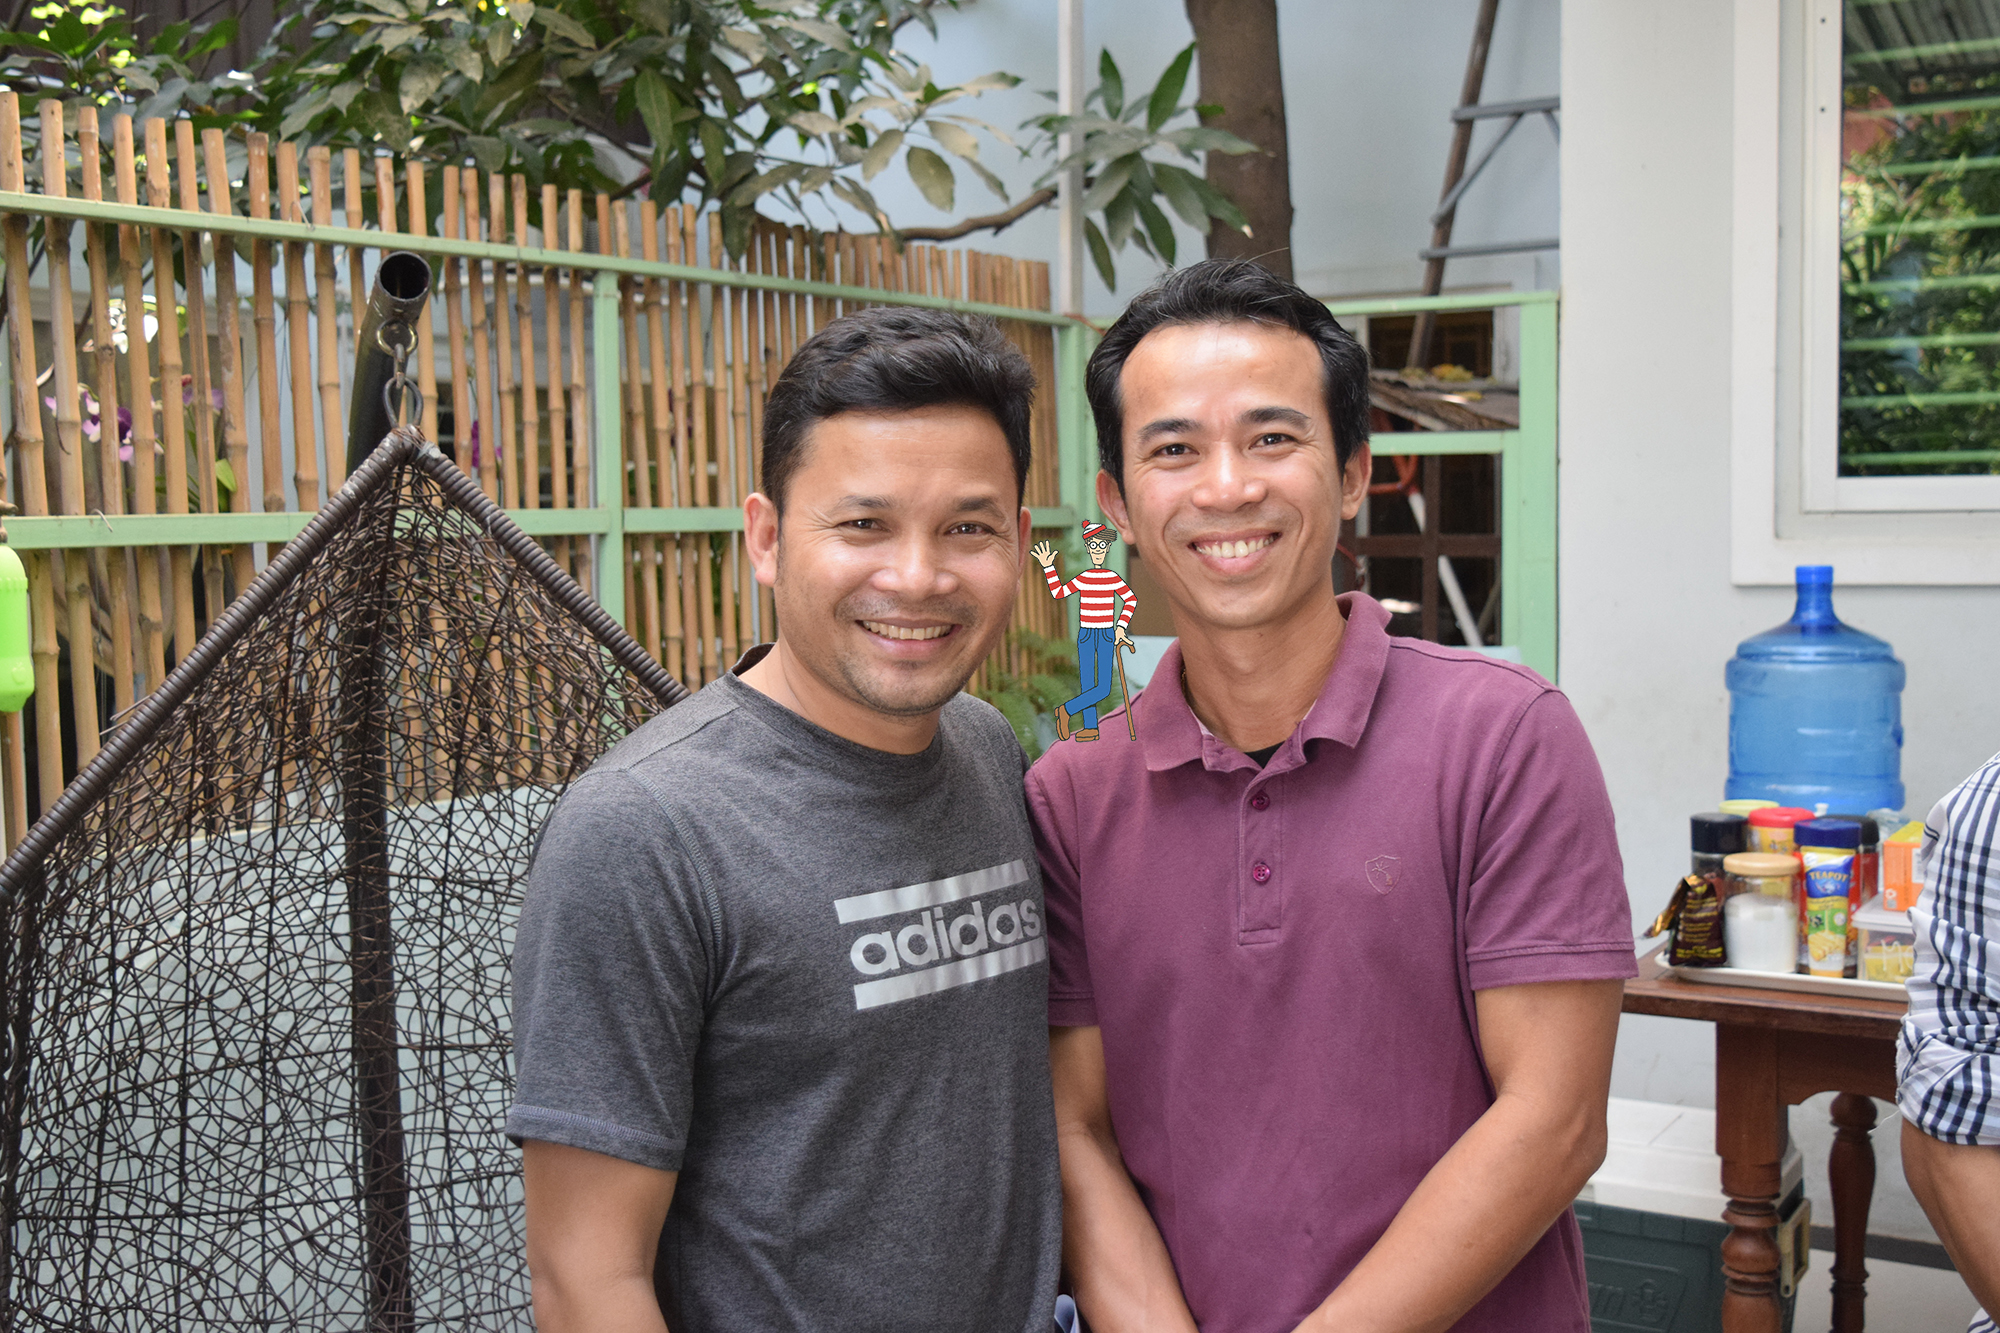 Cambodian IVEP alumni from 2007-2008, Yann Sokhom and Sok Phally, catch up at the alumni gathering.